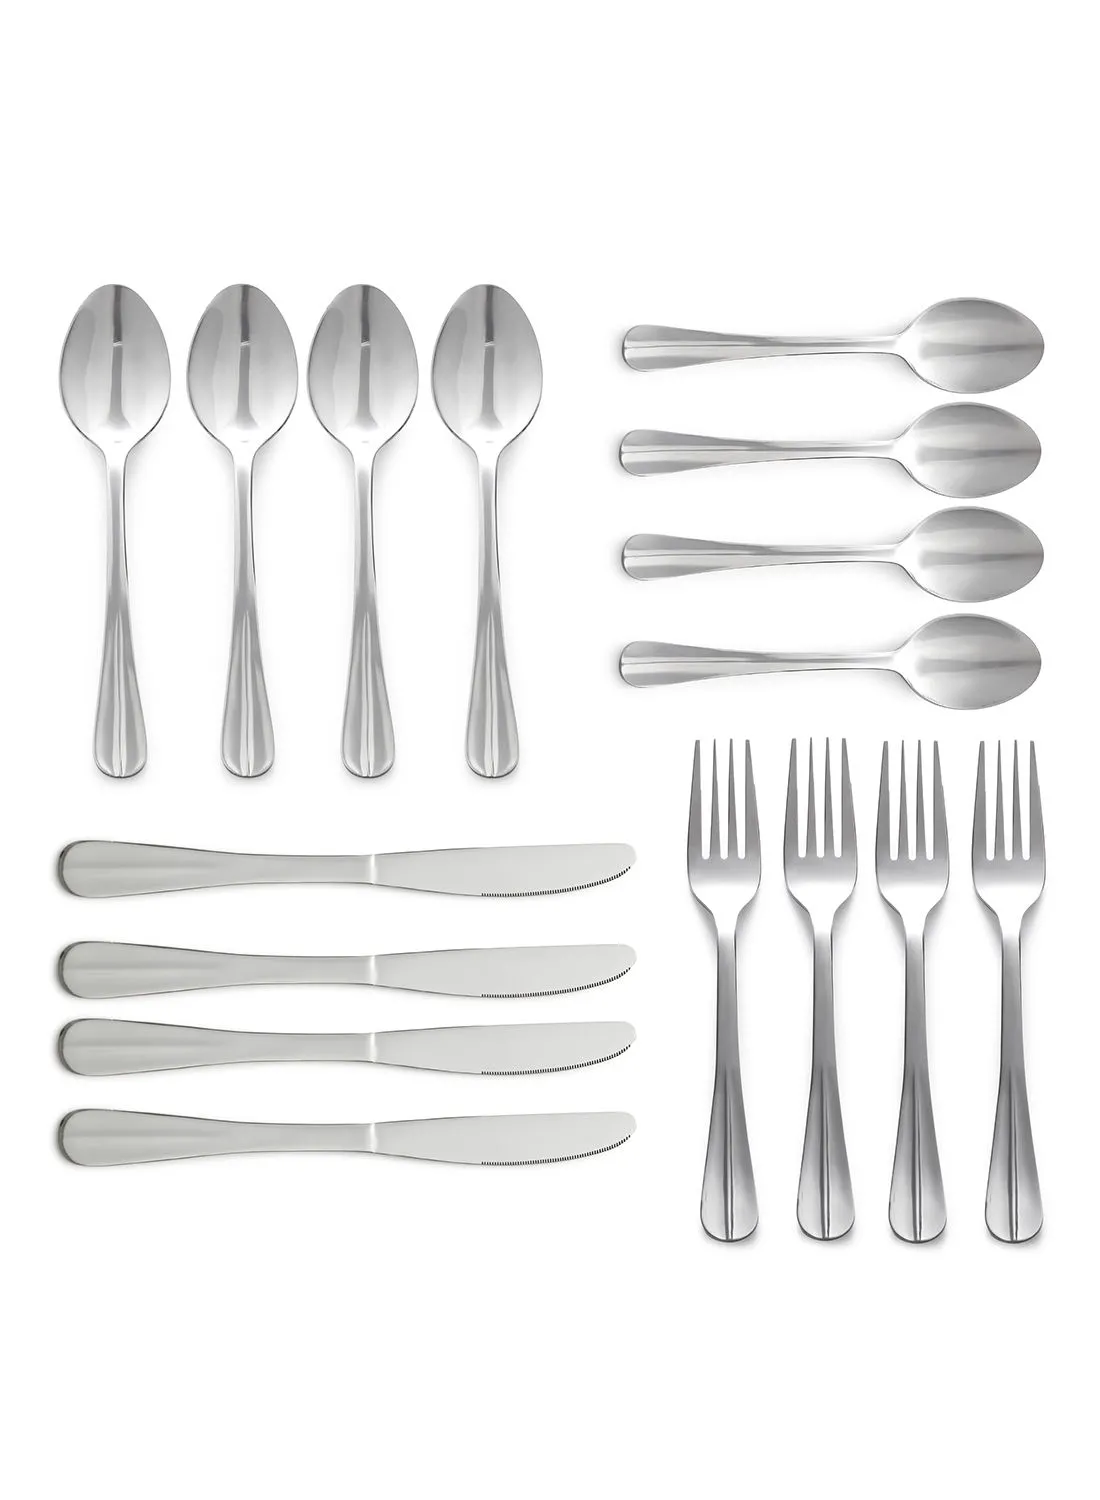 noon east 24 Piece Cutlery Set - Made Of Stainless Steel - Silverware Flatware - Spoons And Forks Set, Spoon Set - Table Spoons, Tea Spoons, Forks, Knives - Serves 6 - Design Silver Flowrish